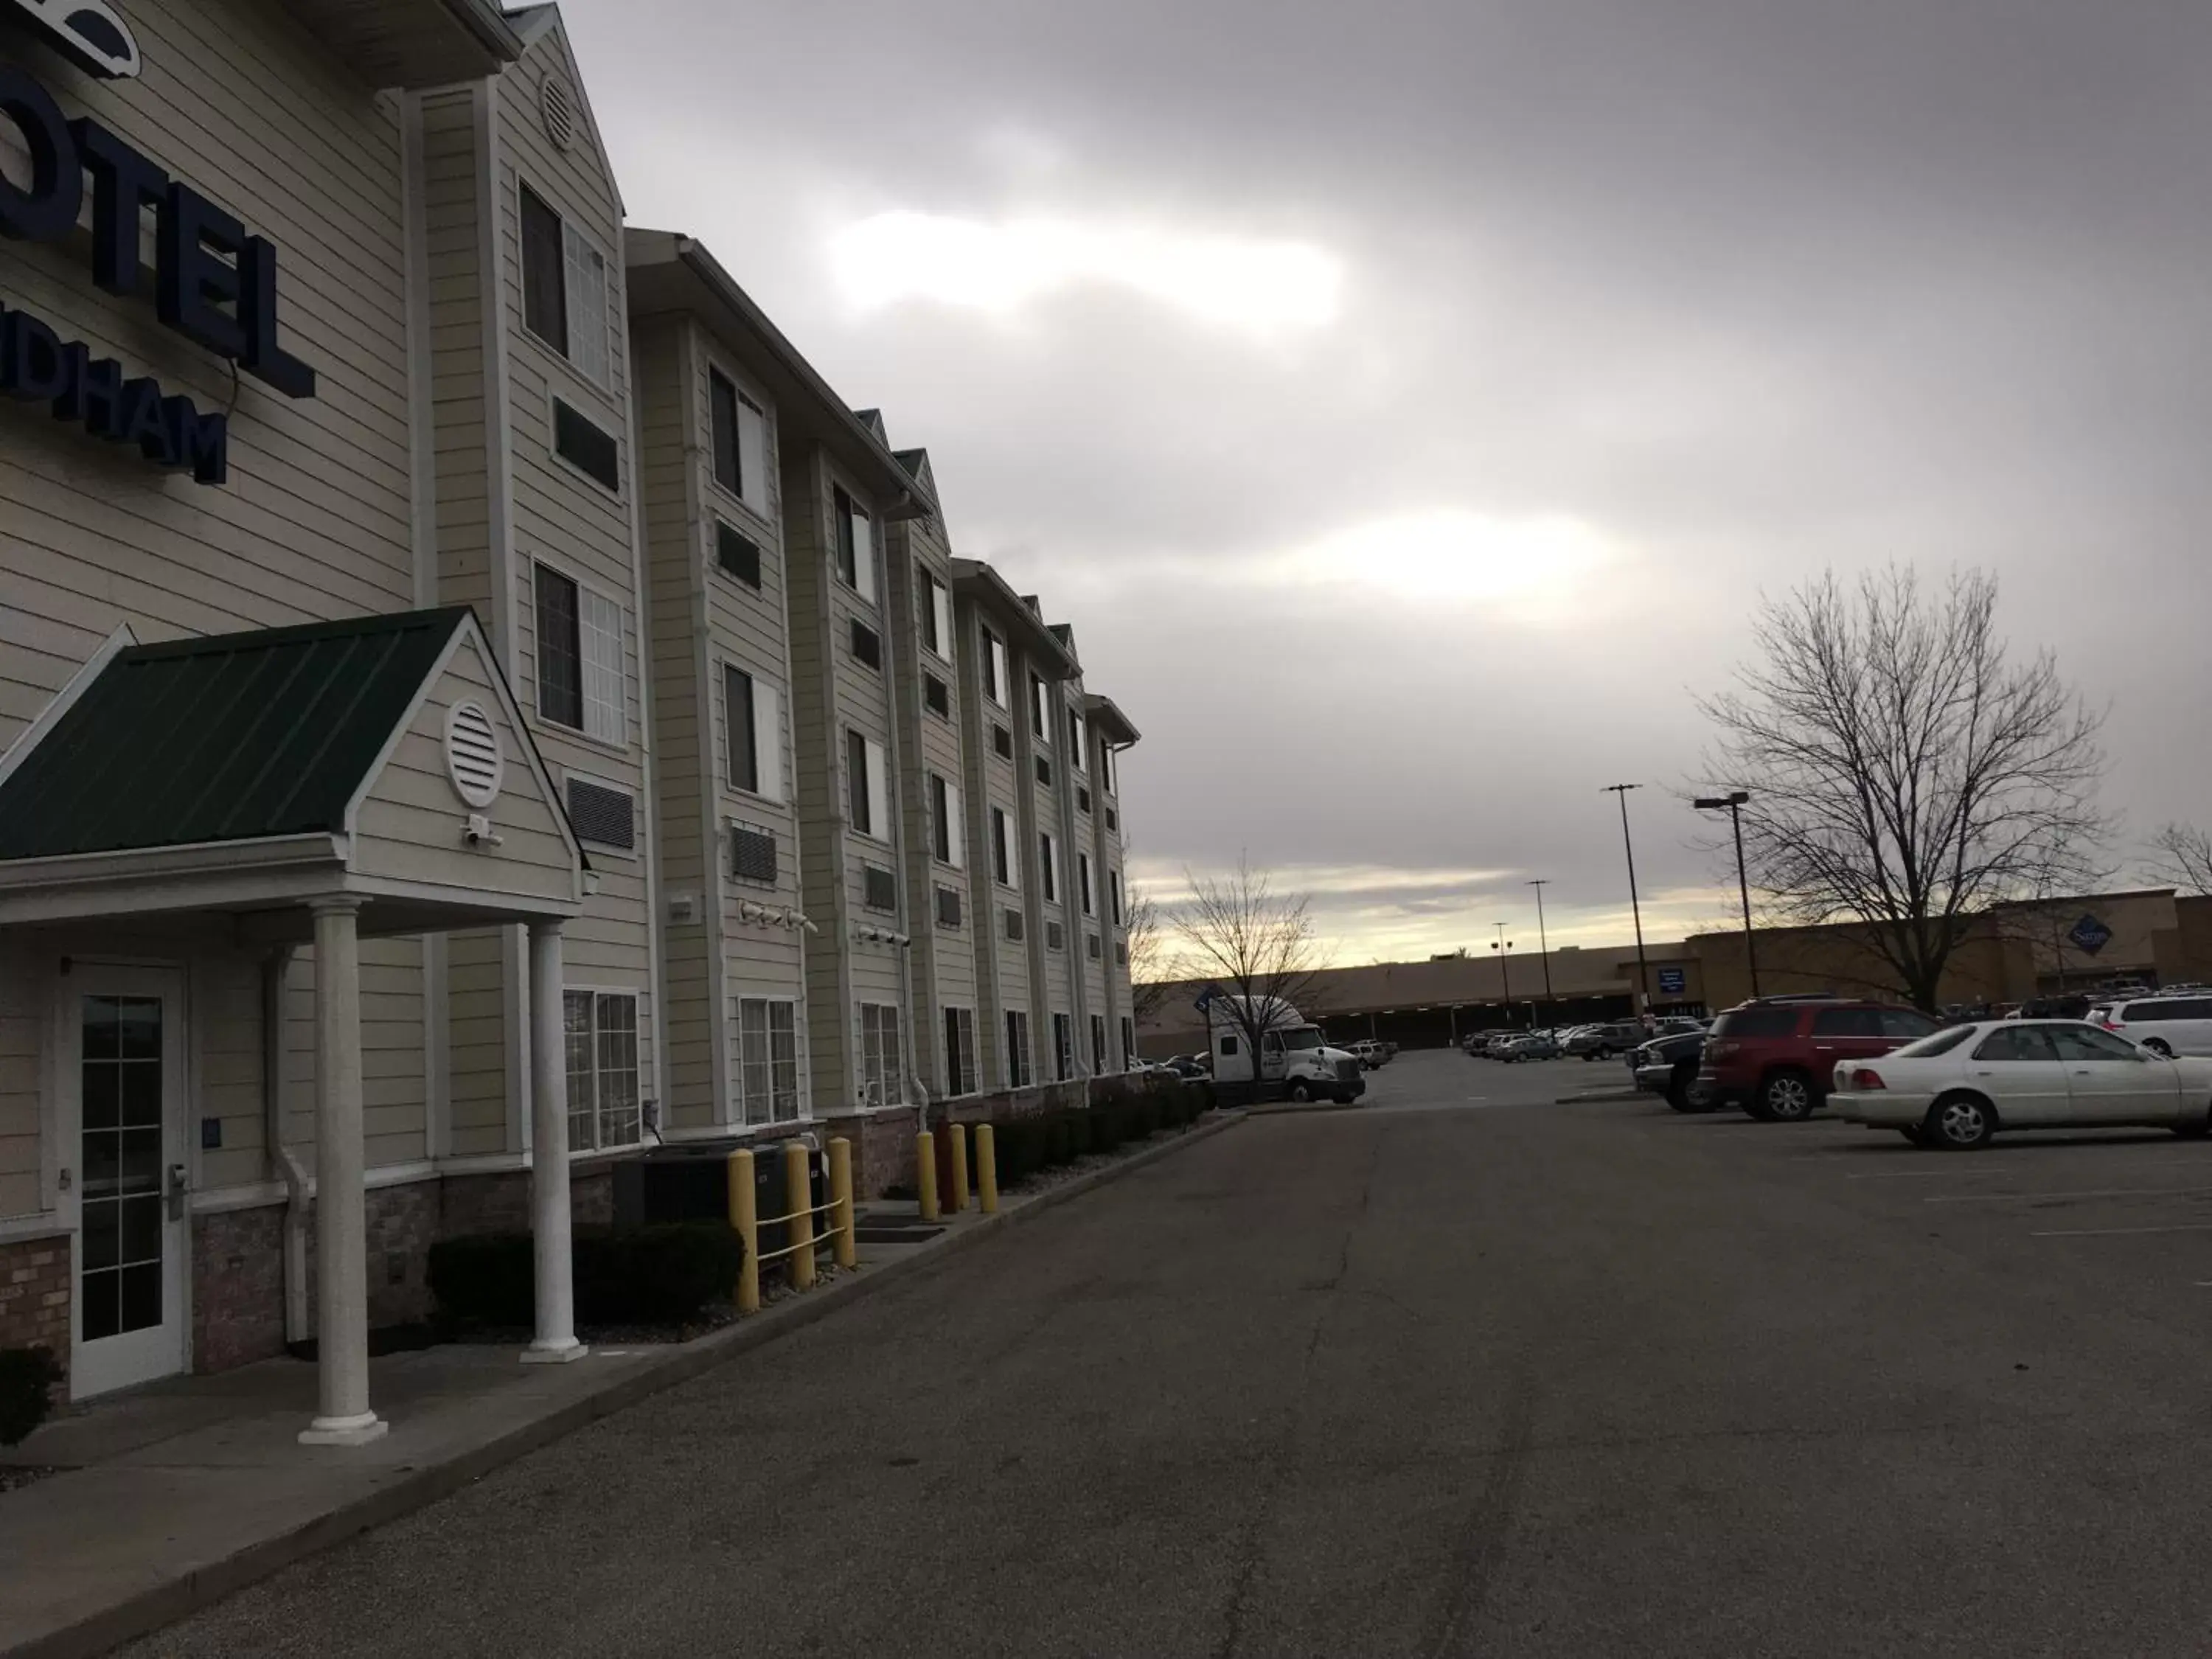 Property building in Microtel Inn & Suites by Wyndham Indianapolis Airport